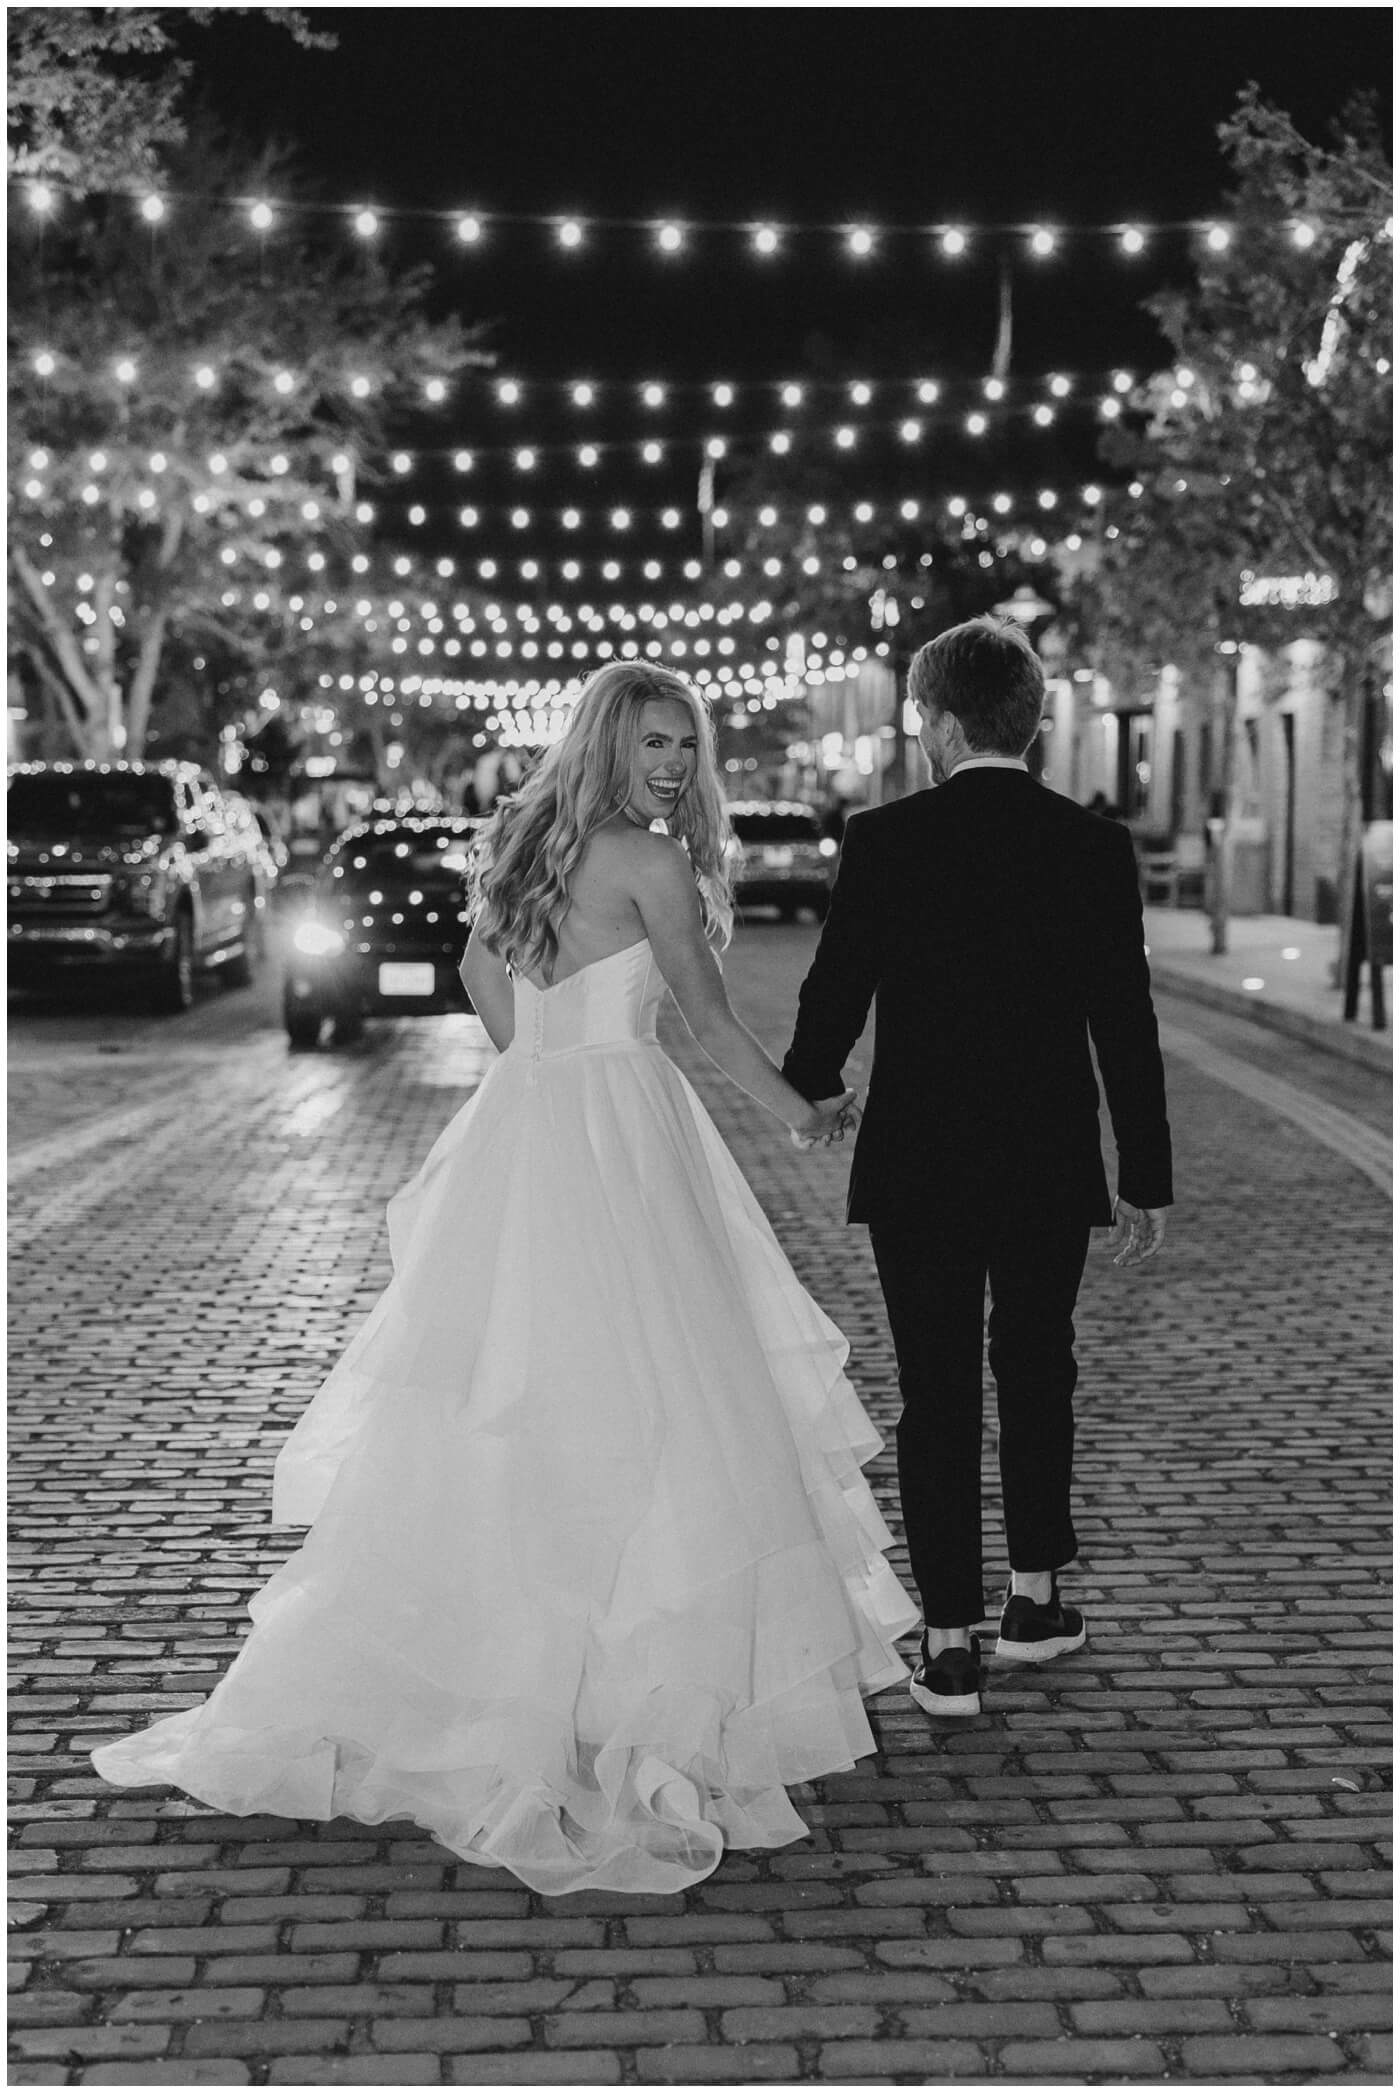 a bride and groom run down the street under lights at night